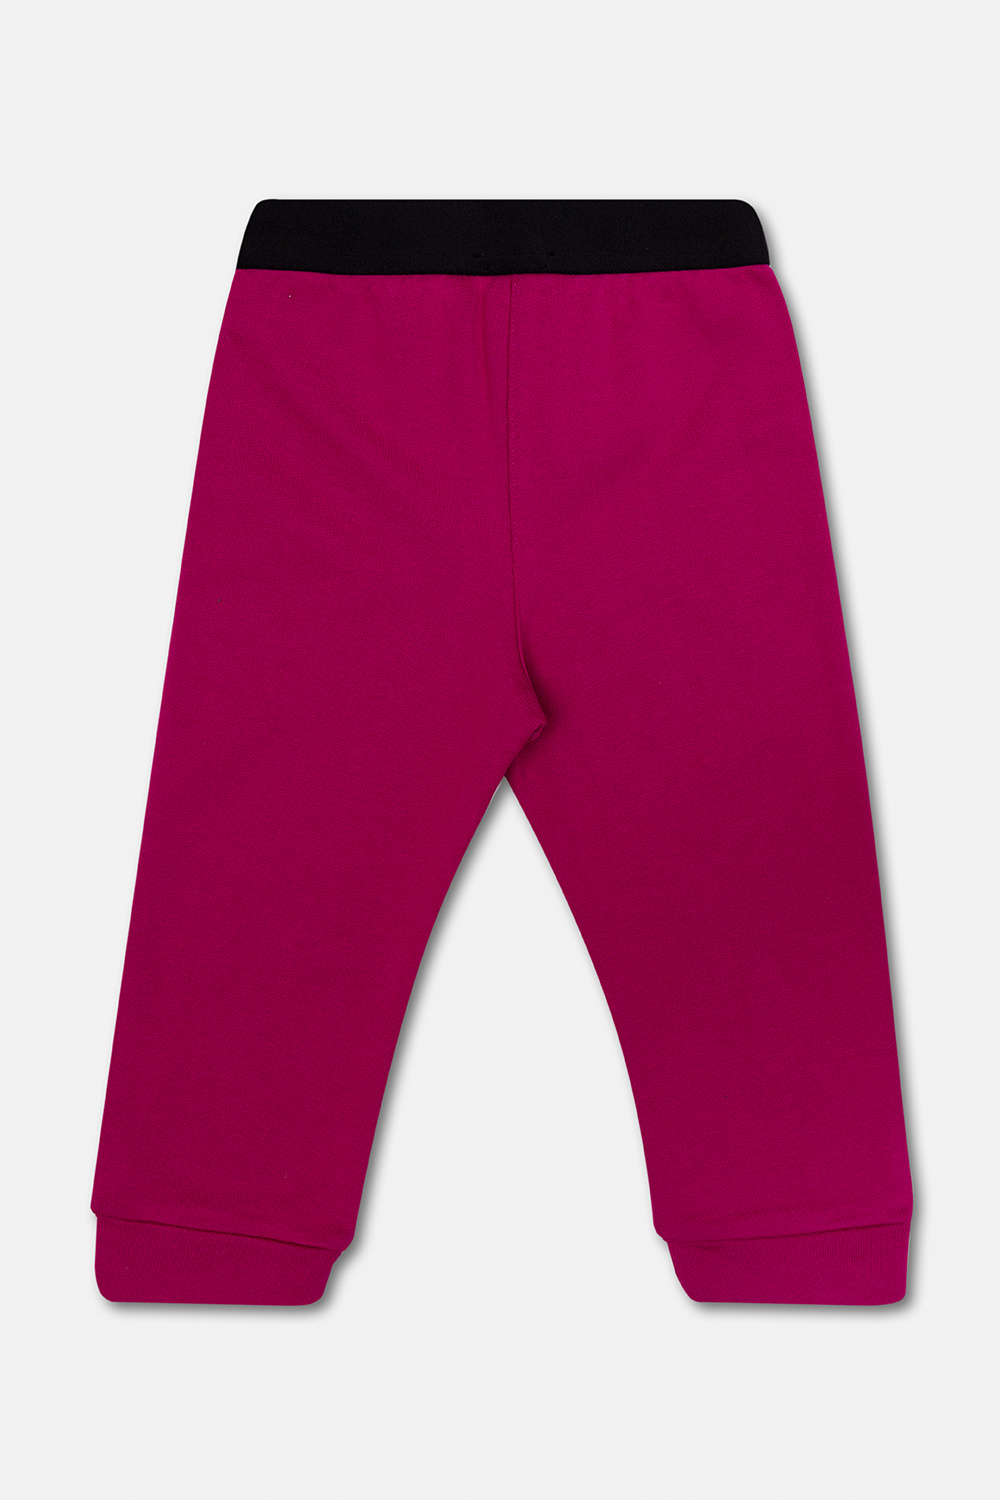 Dolce & Gabbana Kids Cotton trousers Glam with logo